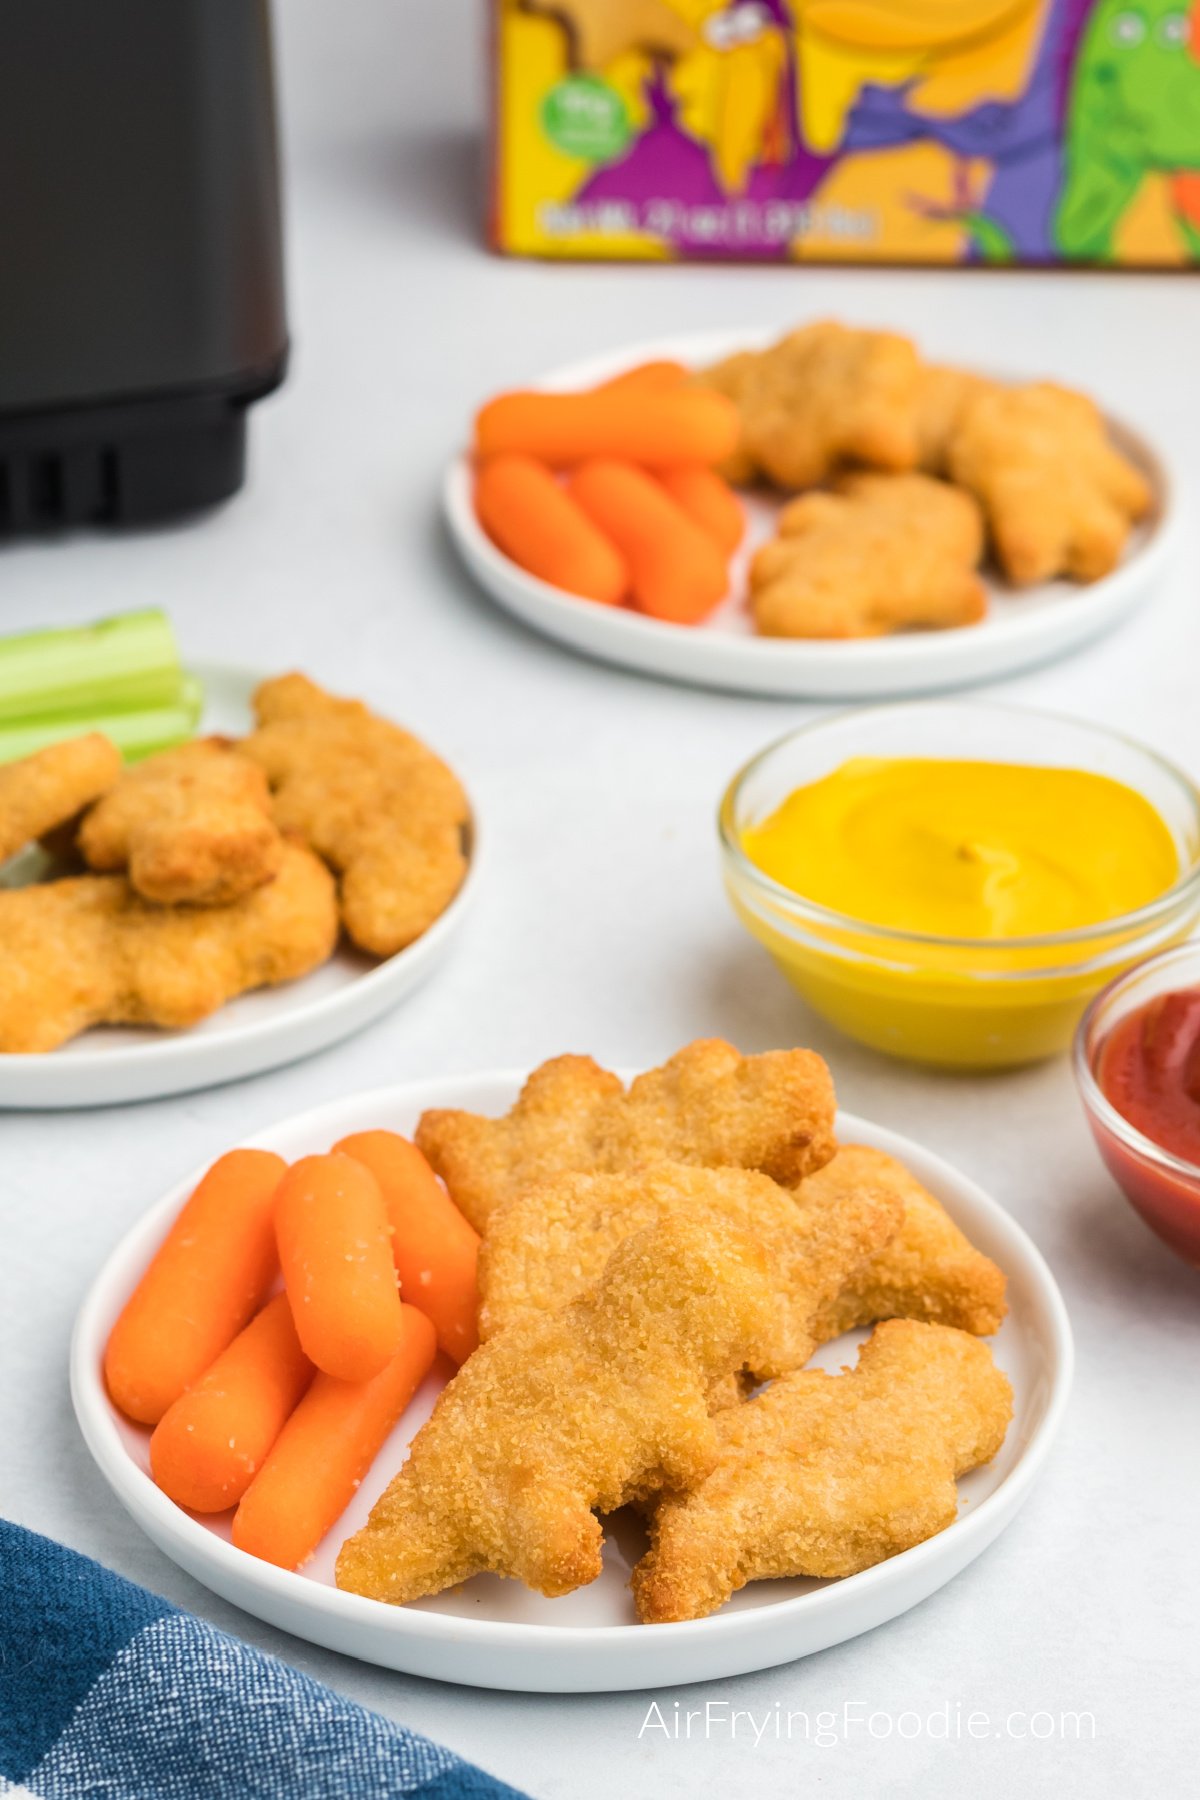 Dino nuggets made in the air fryer, served on plates with carrots and sides of ketchup and mustard.